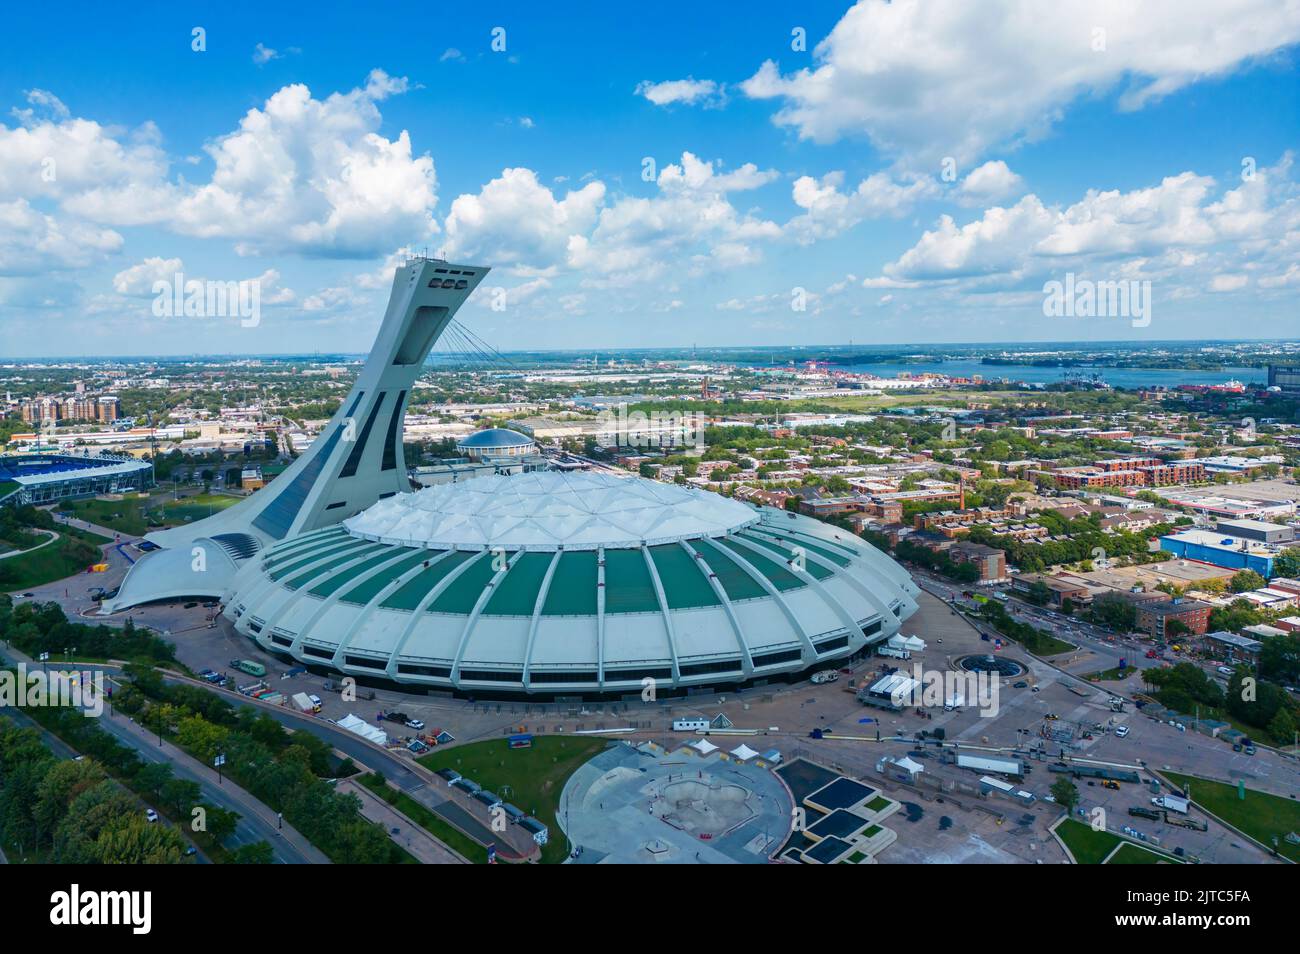 Aerial view of Montreal Olympic stadium Stock Photo